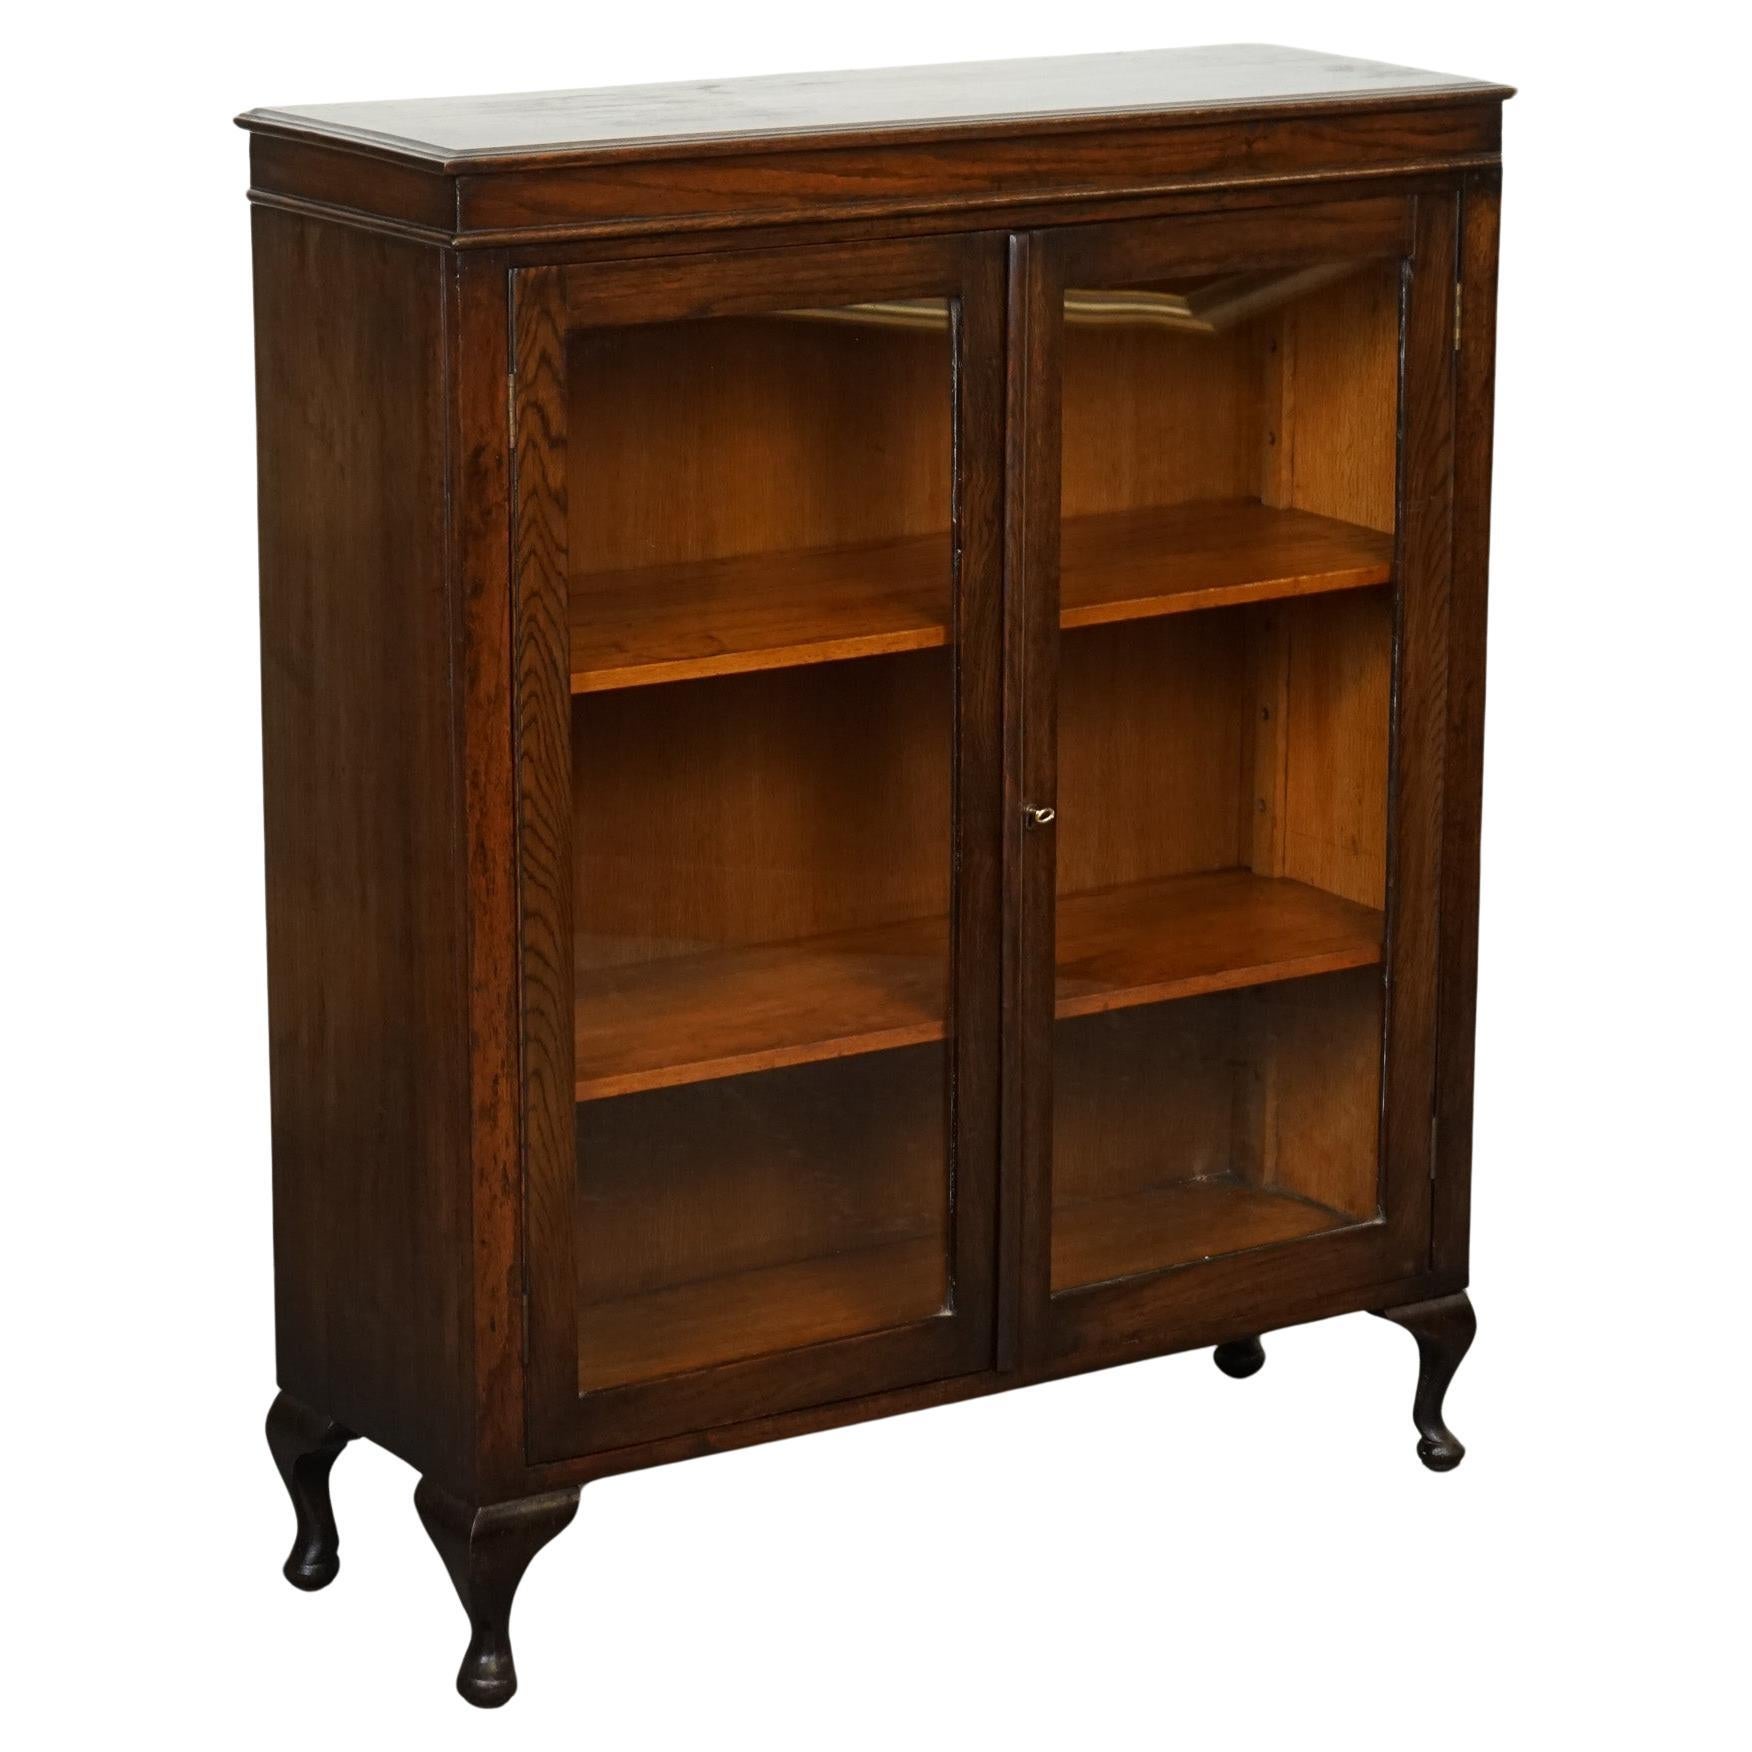 OAK LOW BOOKCASE WITH GLAZED DOORS ADJUSTABLE SHELVES AND CABRIOLE LEGS j1 For Sale